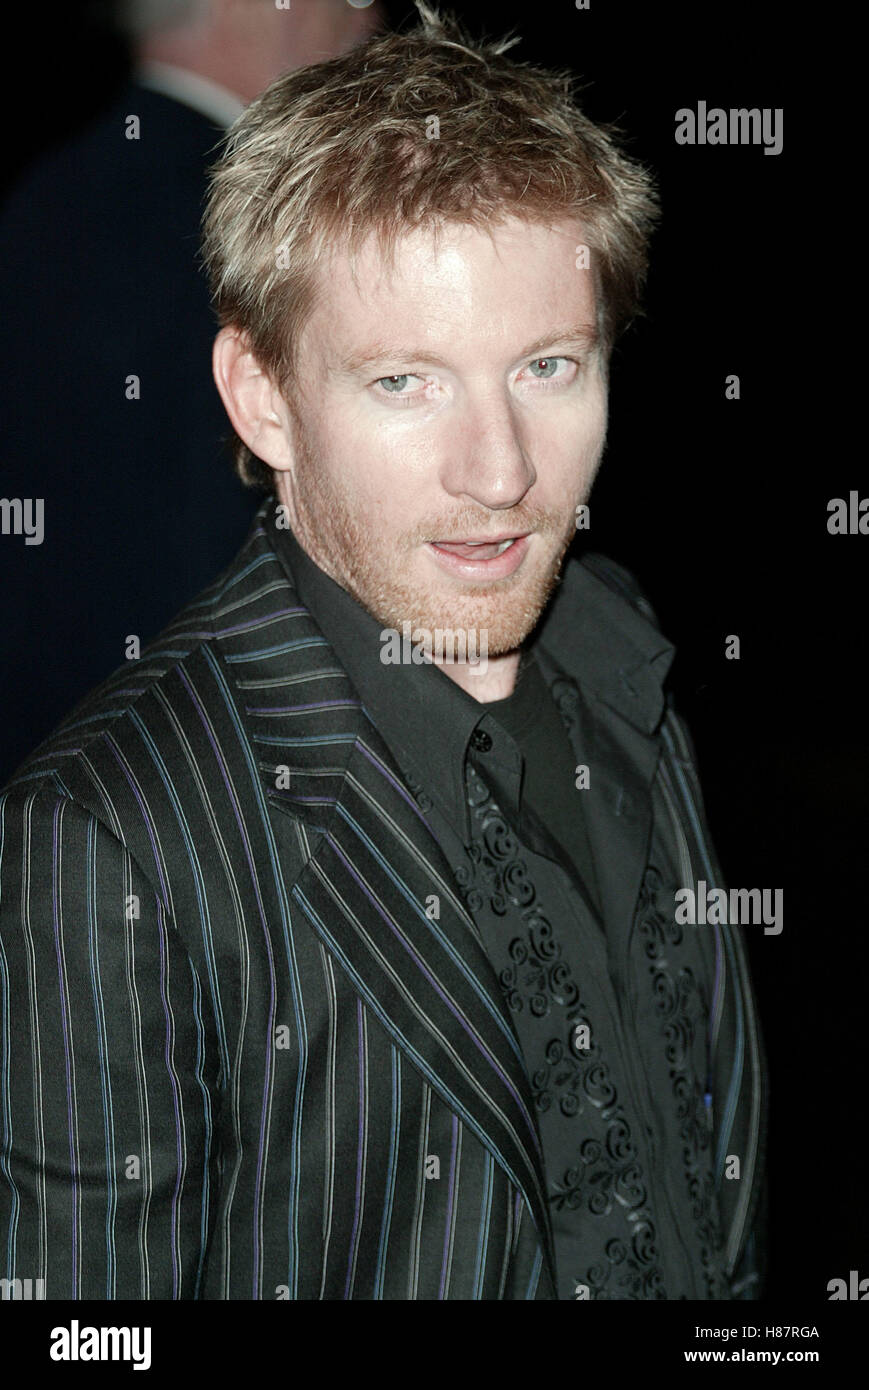 DAVID WENHAM LORD OF THE RINGS PREMIERE 200 ODEON LEICESTER SQUARE LONDON ENGLAND 11 December 2003 Stock Photo